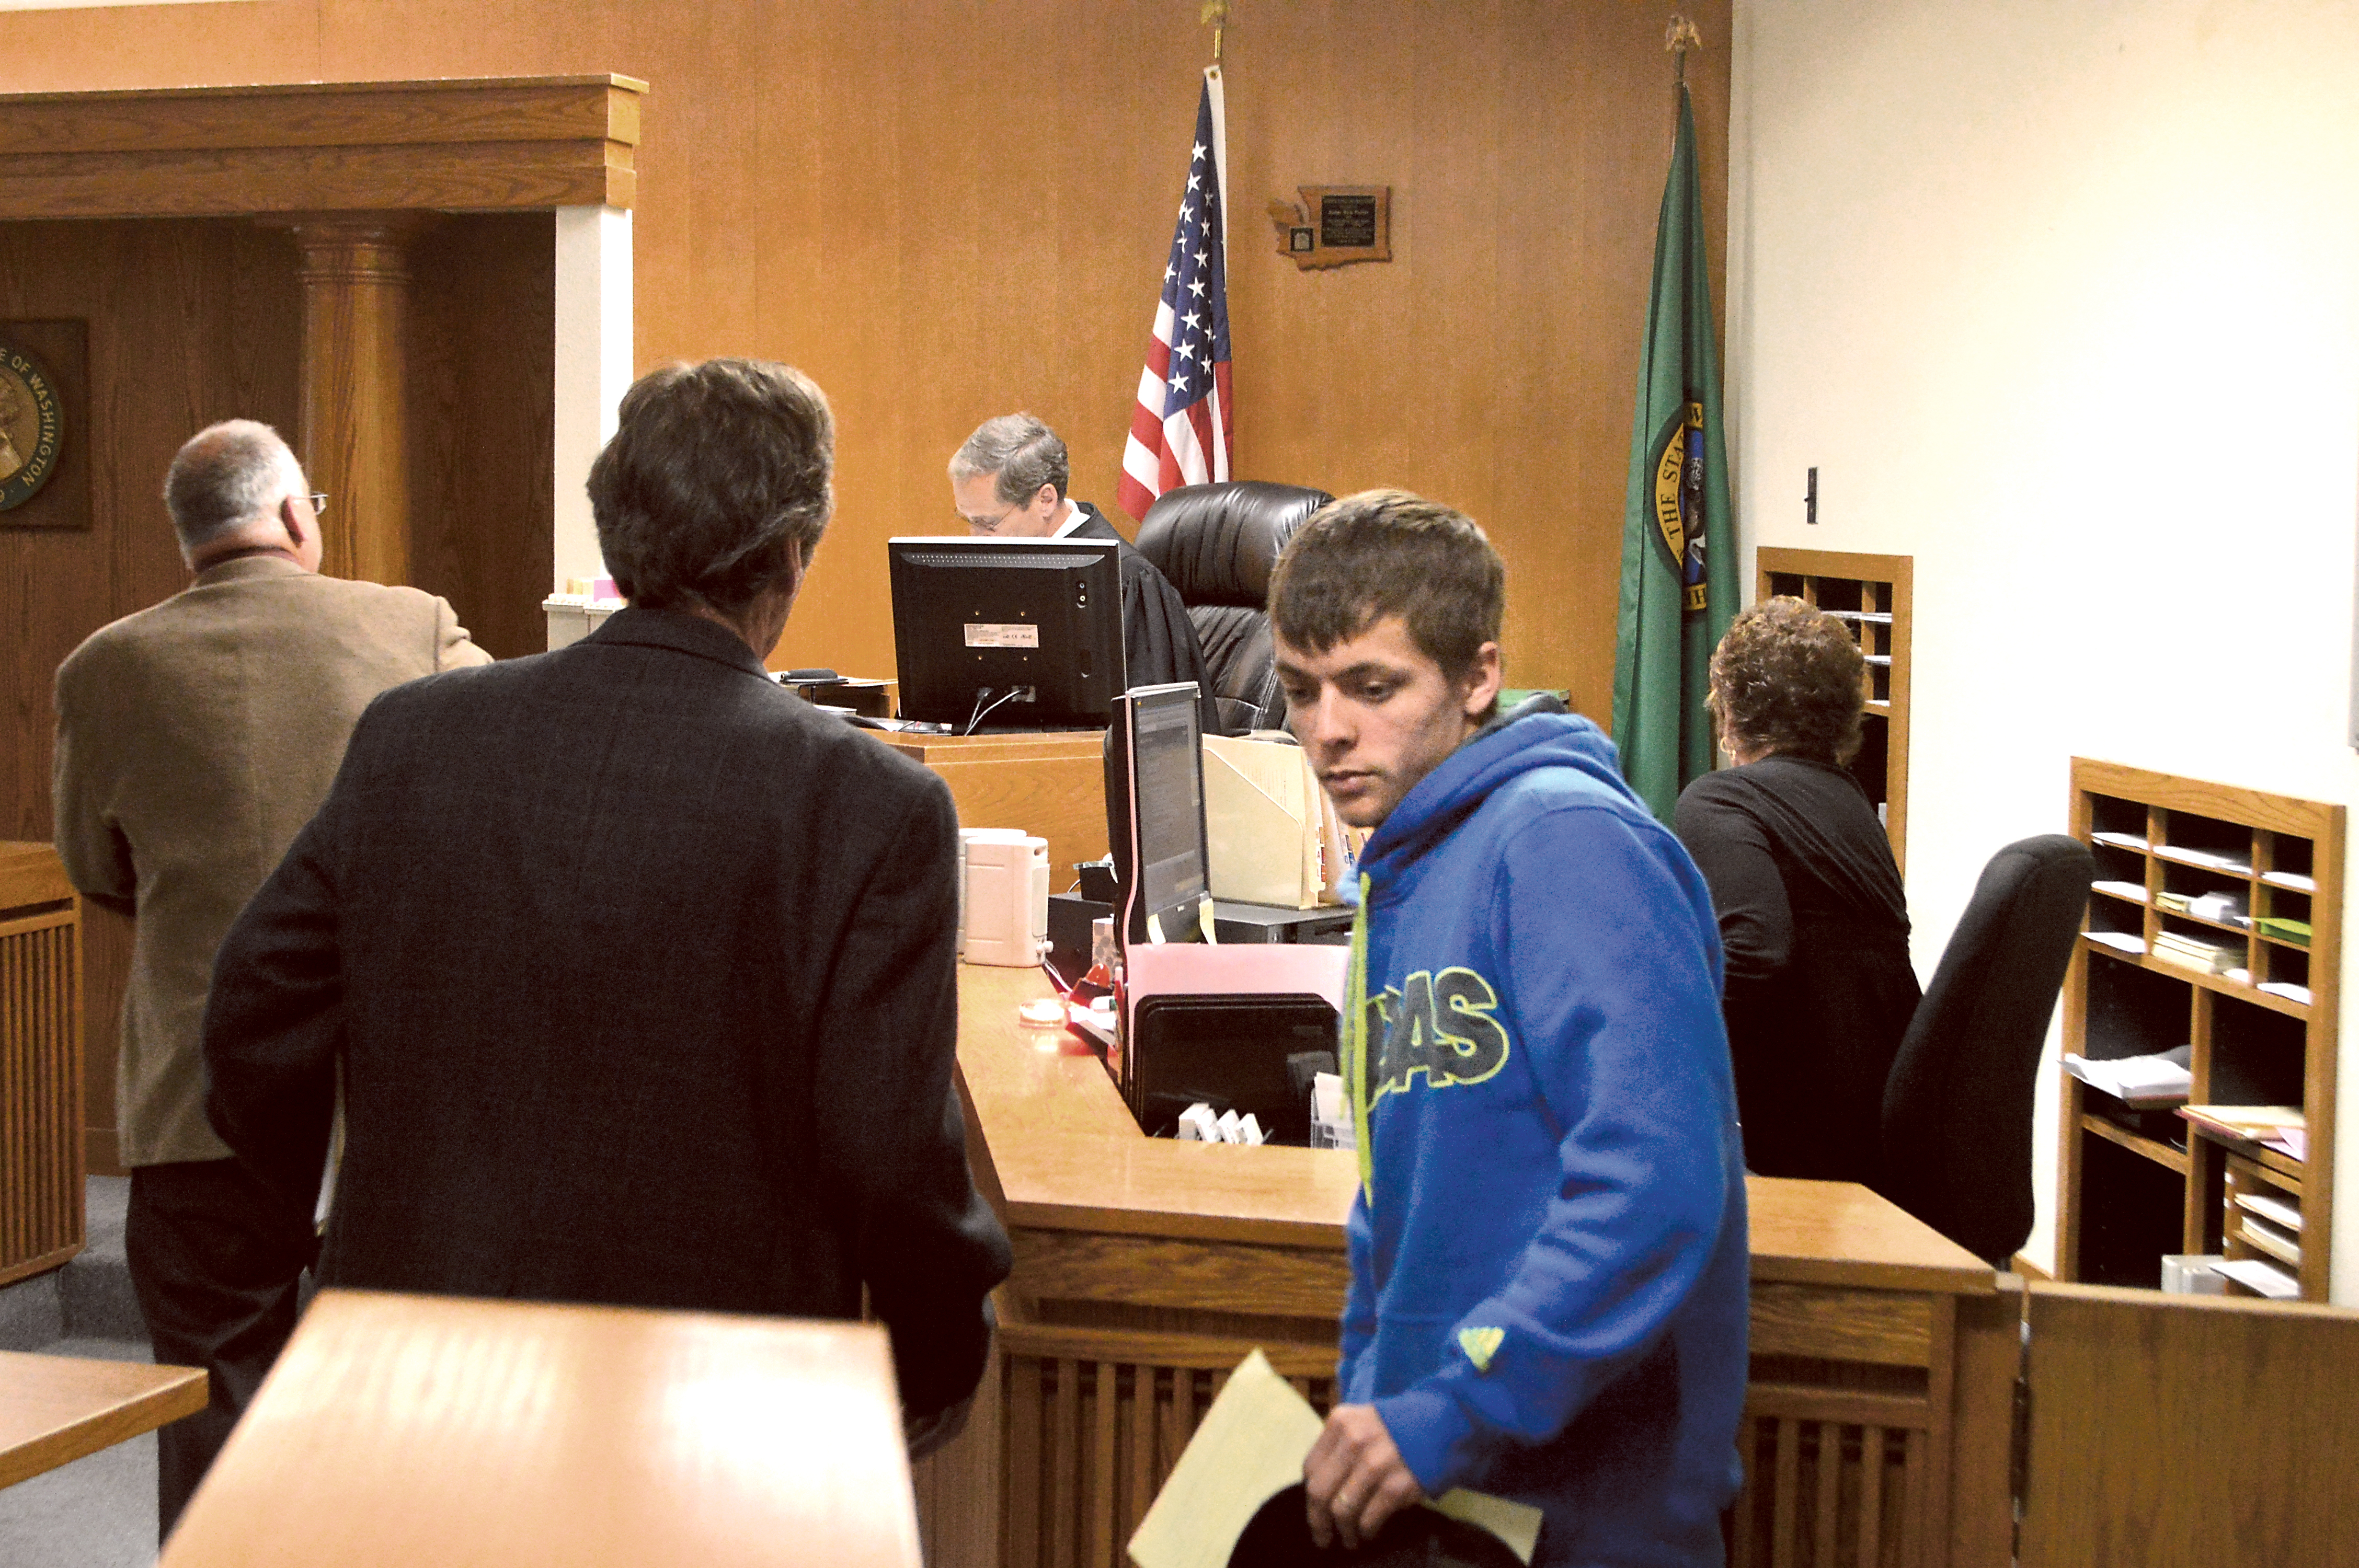 Jason Holden pleaded not guilty to disorderly conduct in Clallam County District Court on Thursday. Joe Smillie/Peninsula Daily News